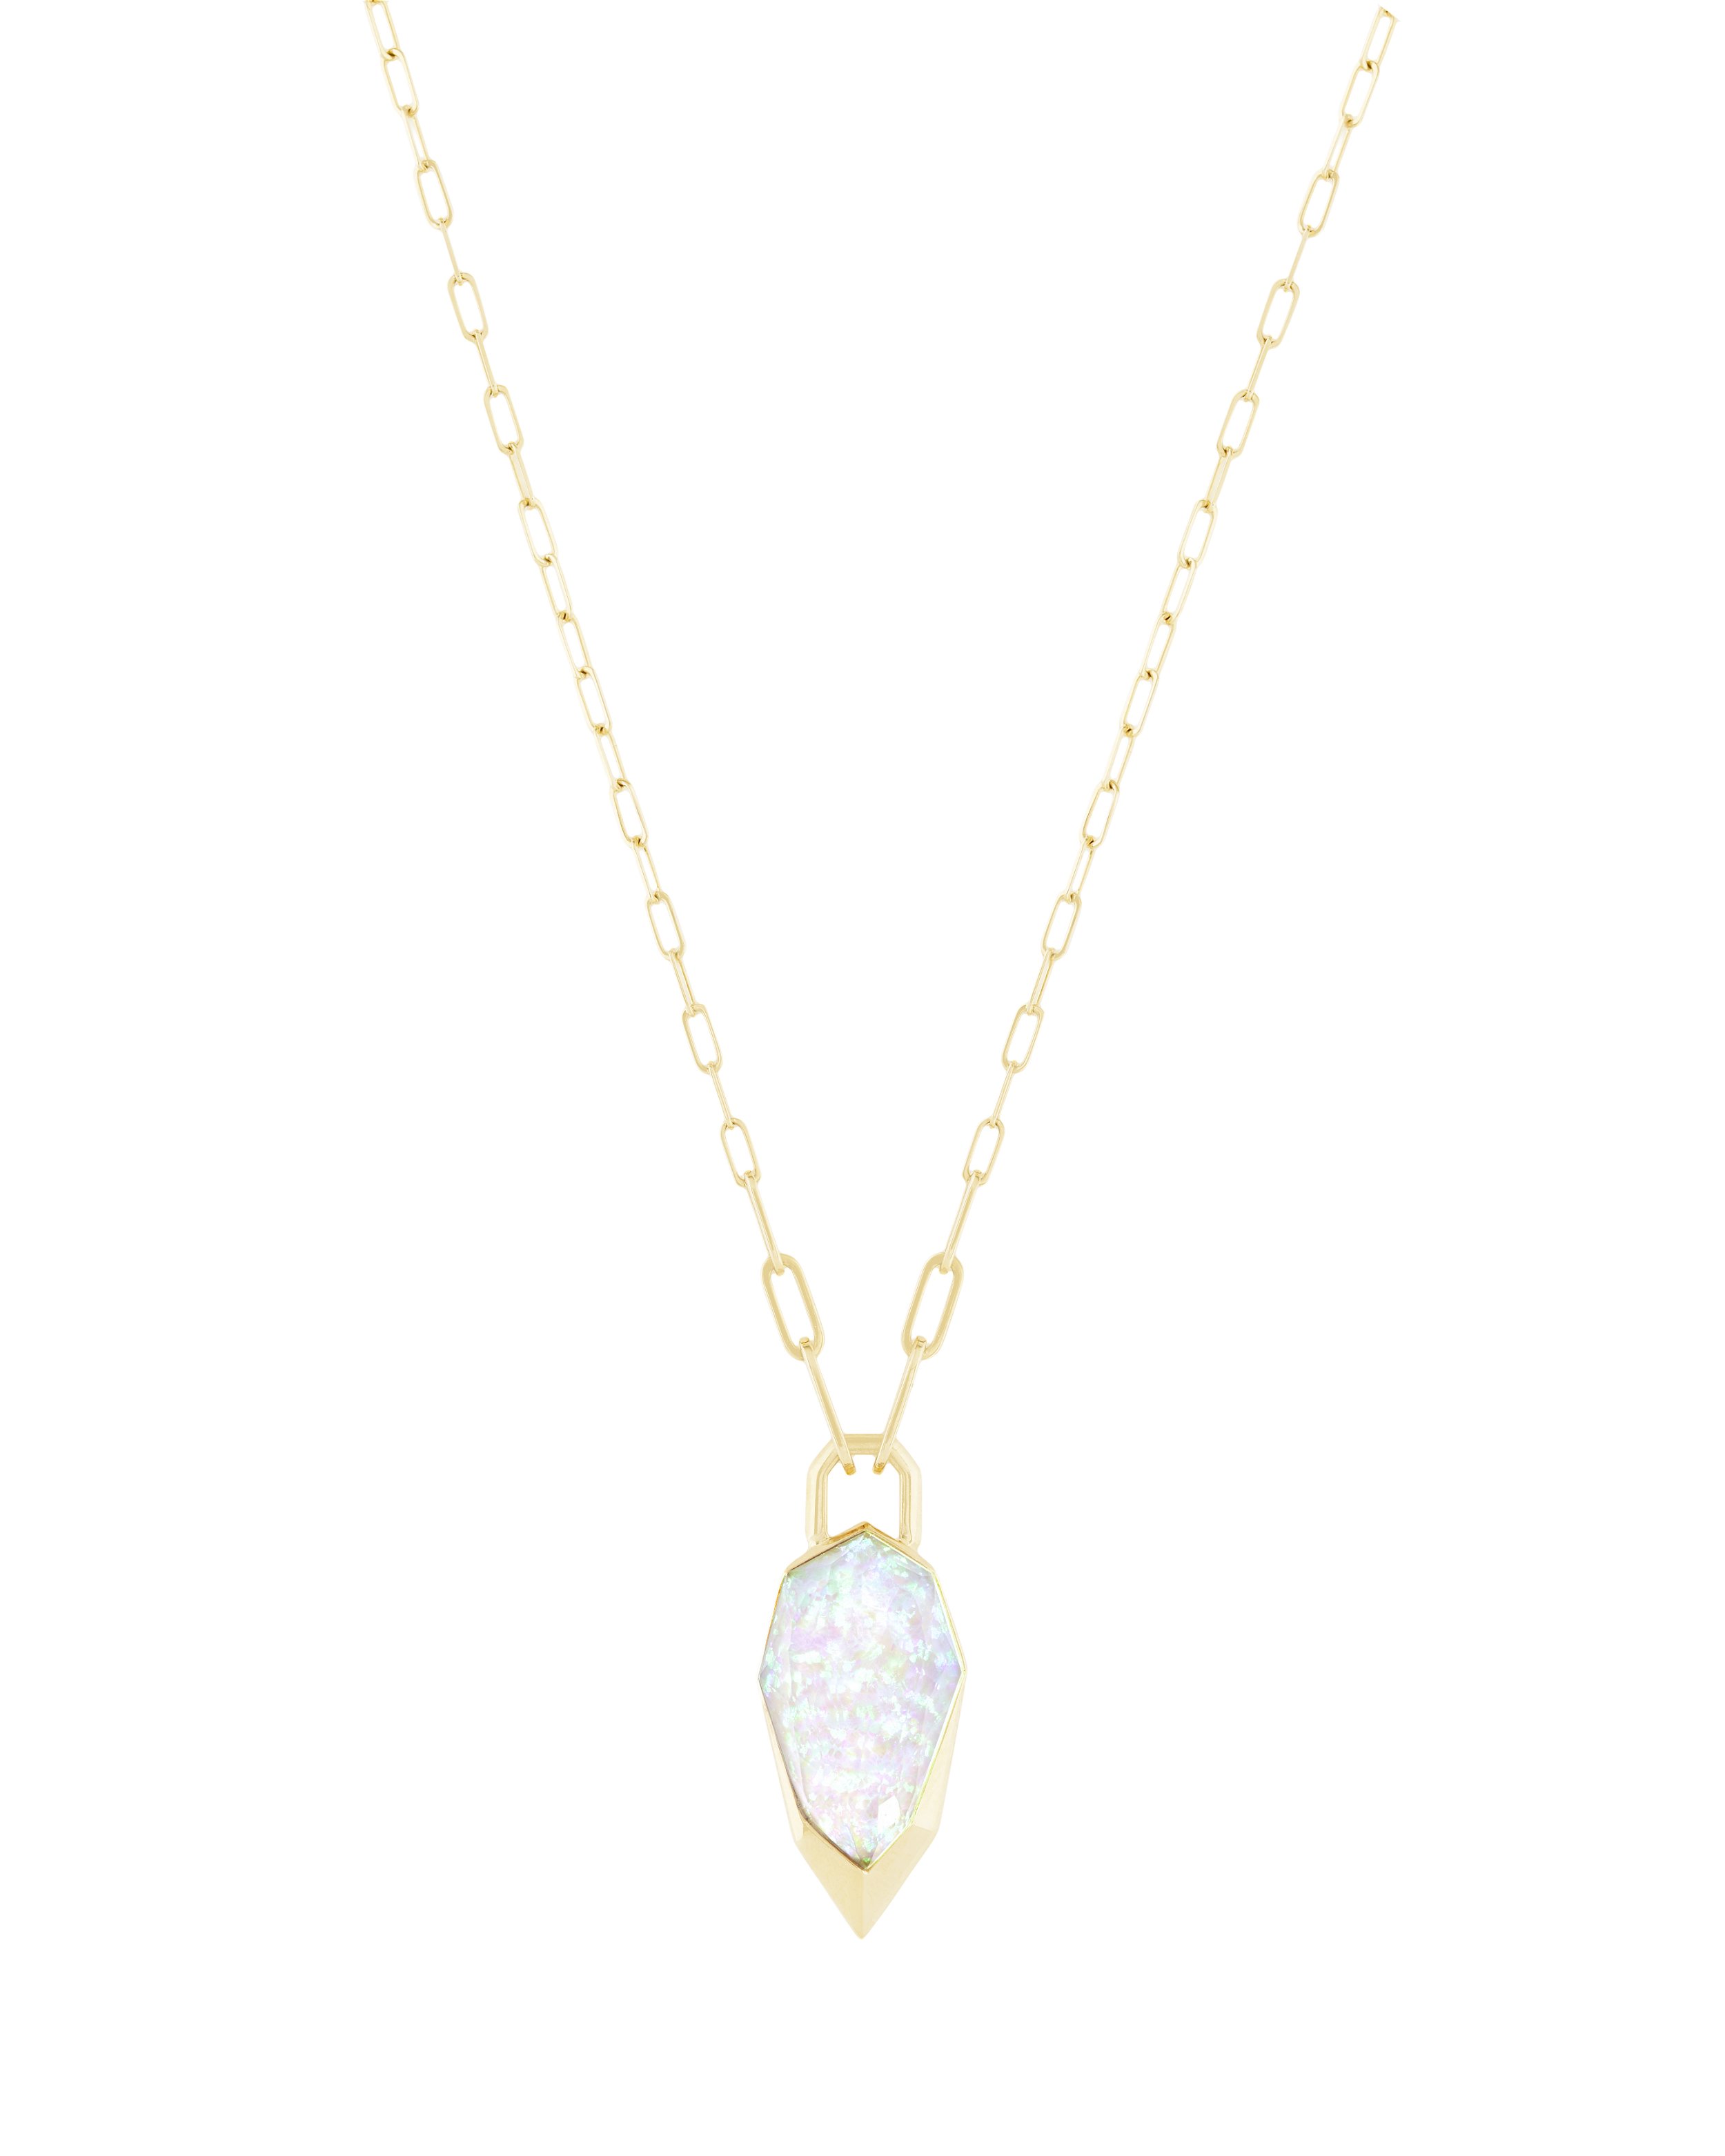 CH2 Double Dipped Pendant Necklace with White Opalescent in 18kt Yellow Gold